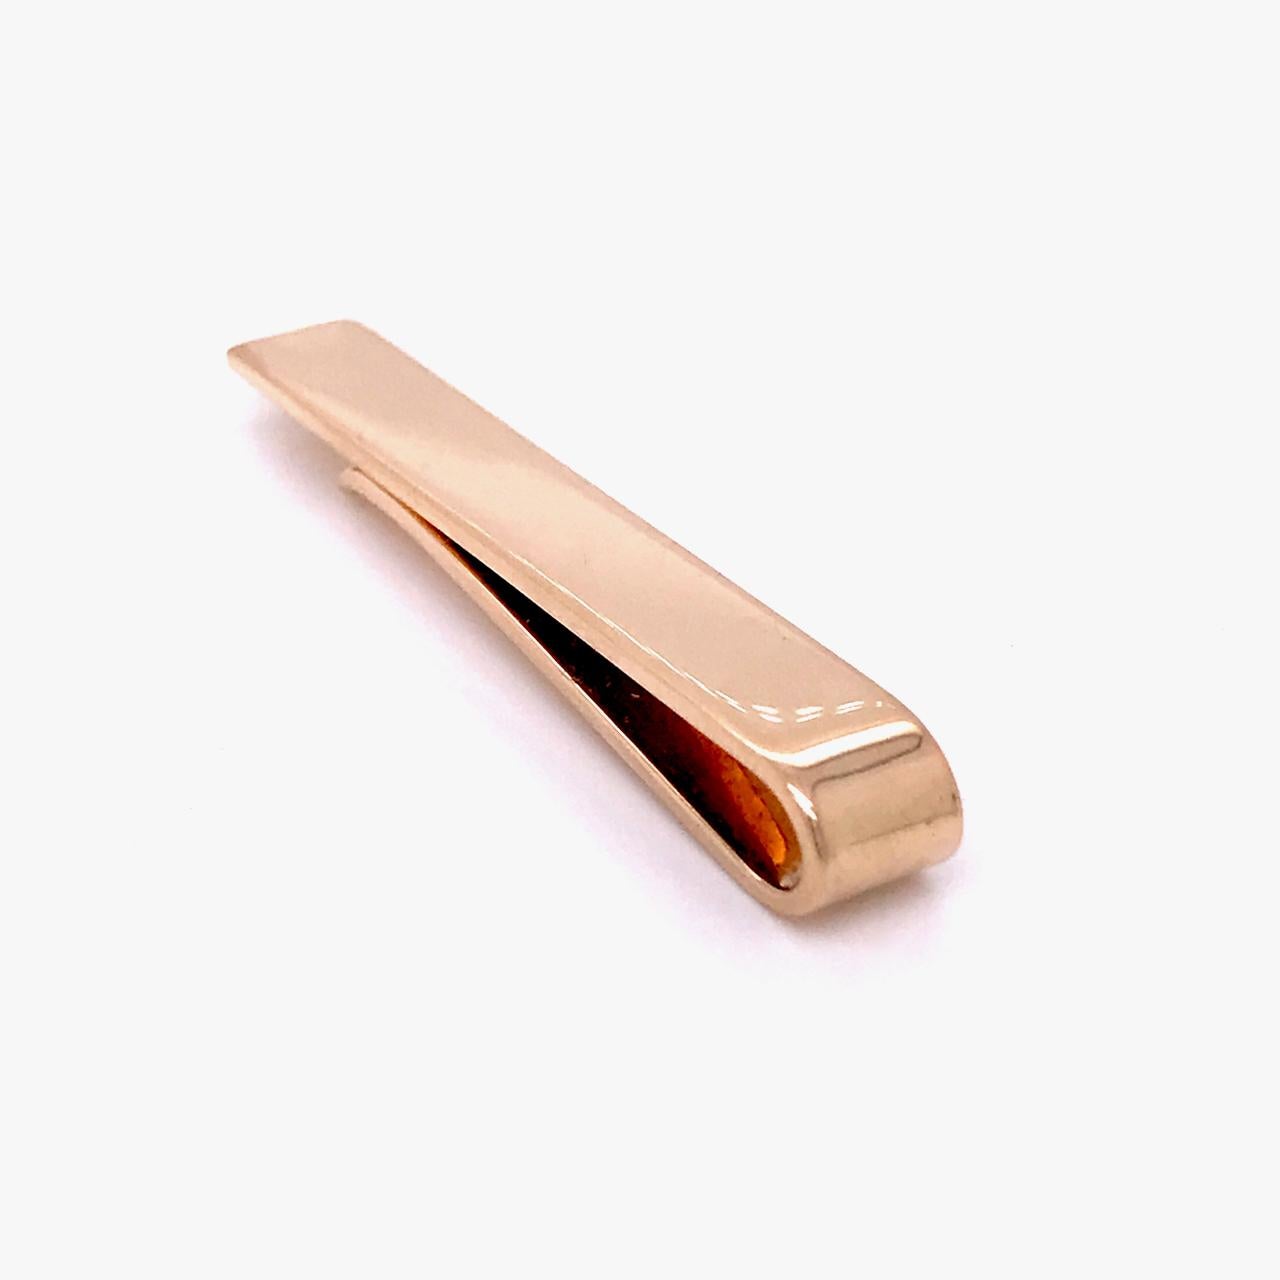 A handsome Tiffany & Co. tie clip.

In 14K gold with simple, clean lines.

Marked to the reverse: Tiffany & Co and 14k for gold fineness.

The perfect gift for the well-dressed man!

Length: ca. 44 mm

Items purchased from this dealer must delight